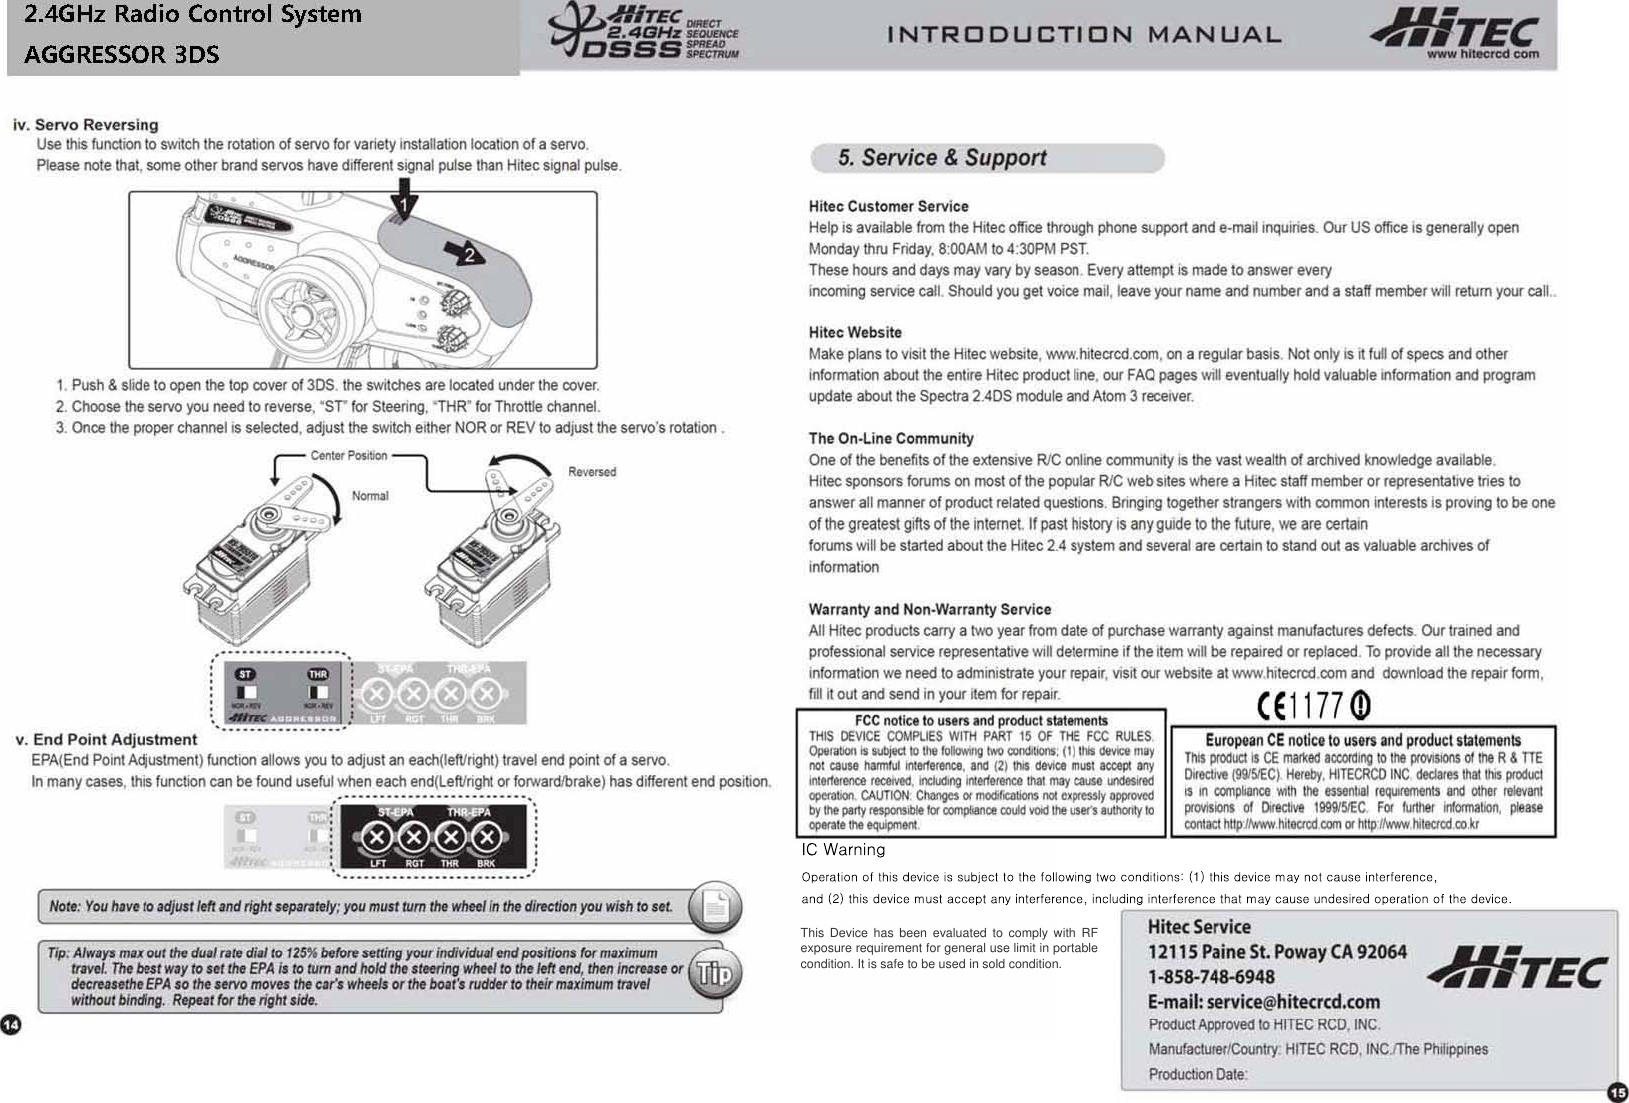 Hitec RCD AGGRES3DS 2.4GHz Radio Control System User Manual 20101117